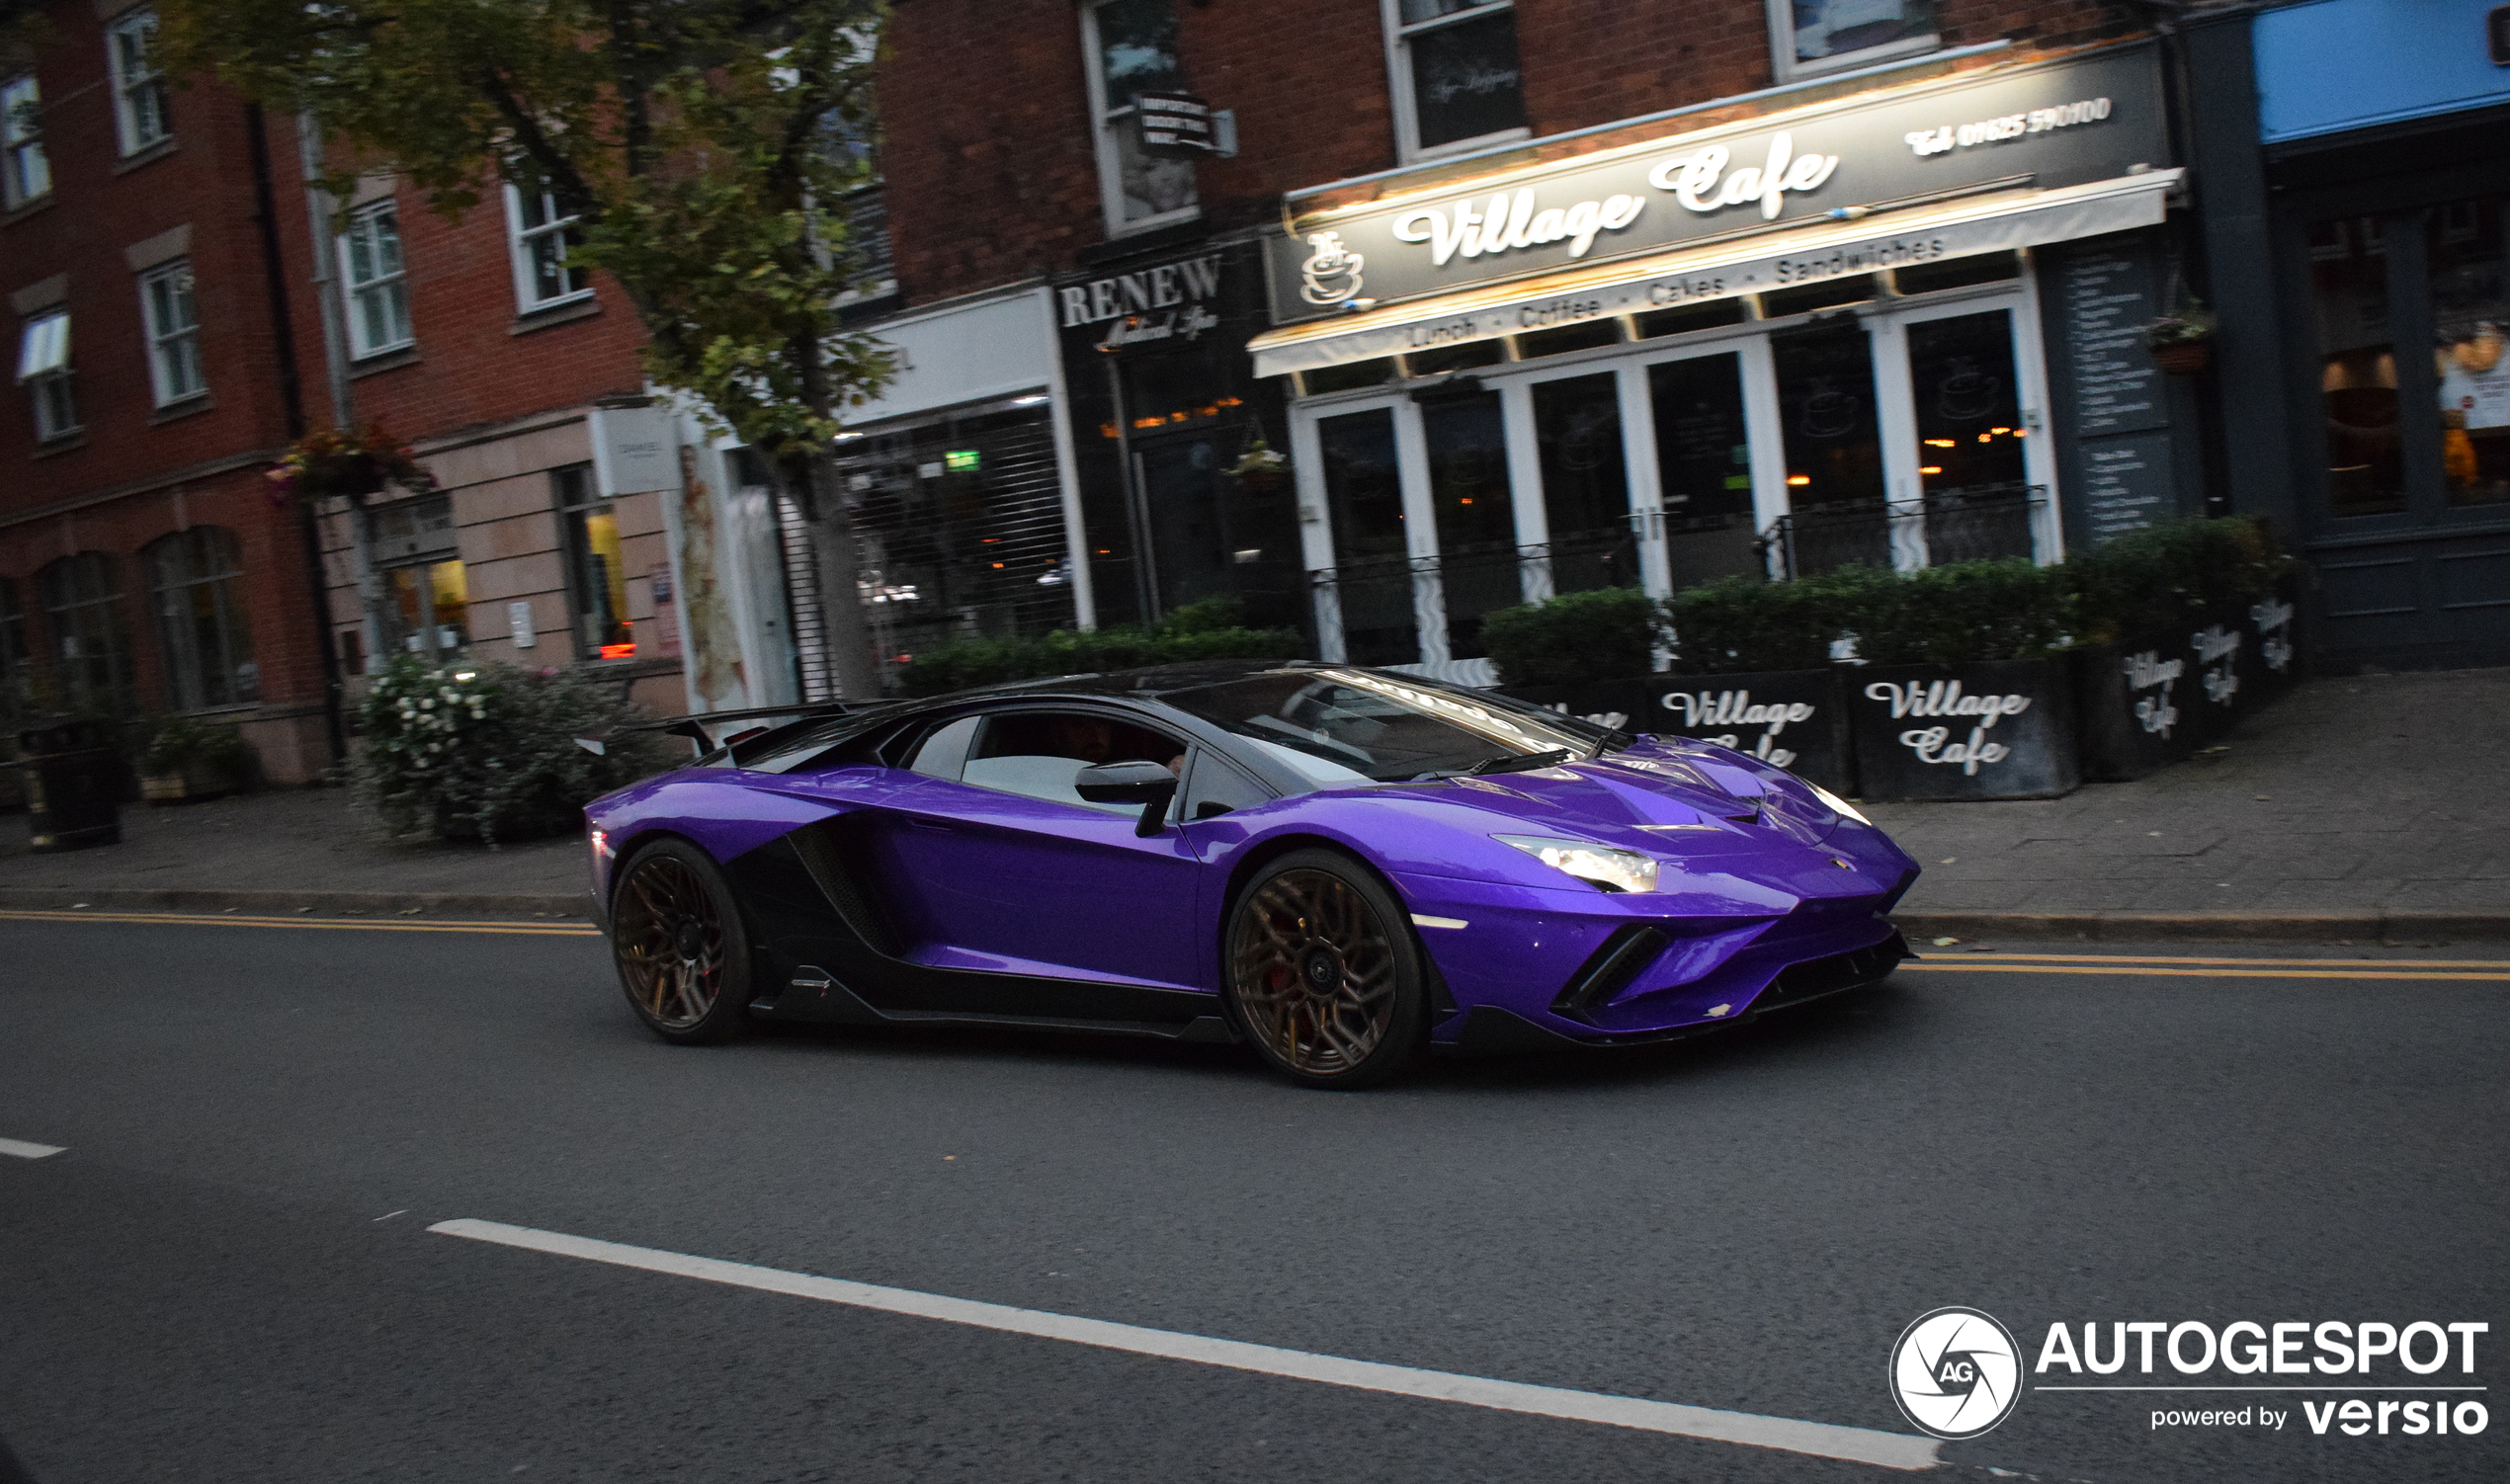 Another Aventador S by Onyx Design shows up in London